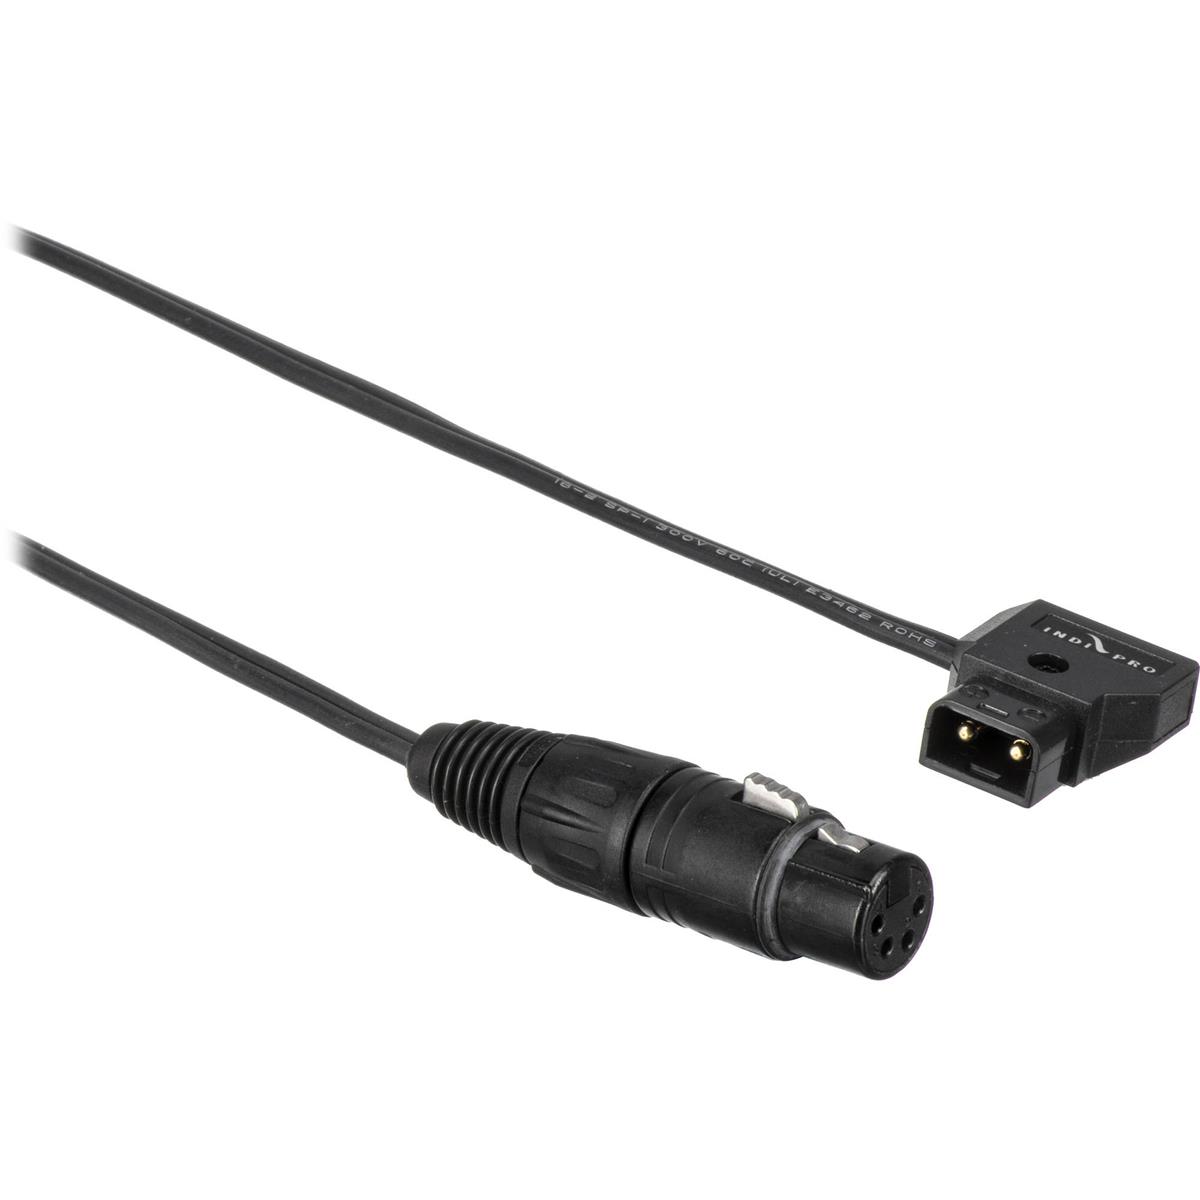 Power safe connect. XLR 4 Pin. Bracket with p-tap to 4-Pin XLR Cable.